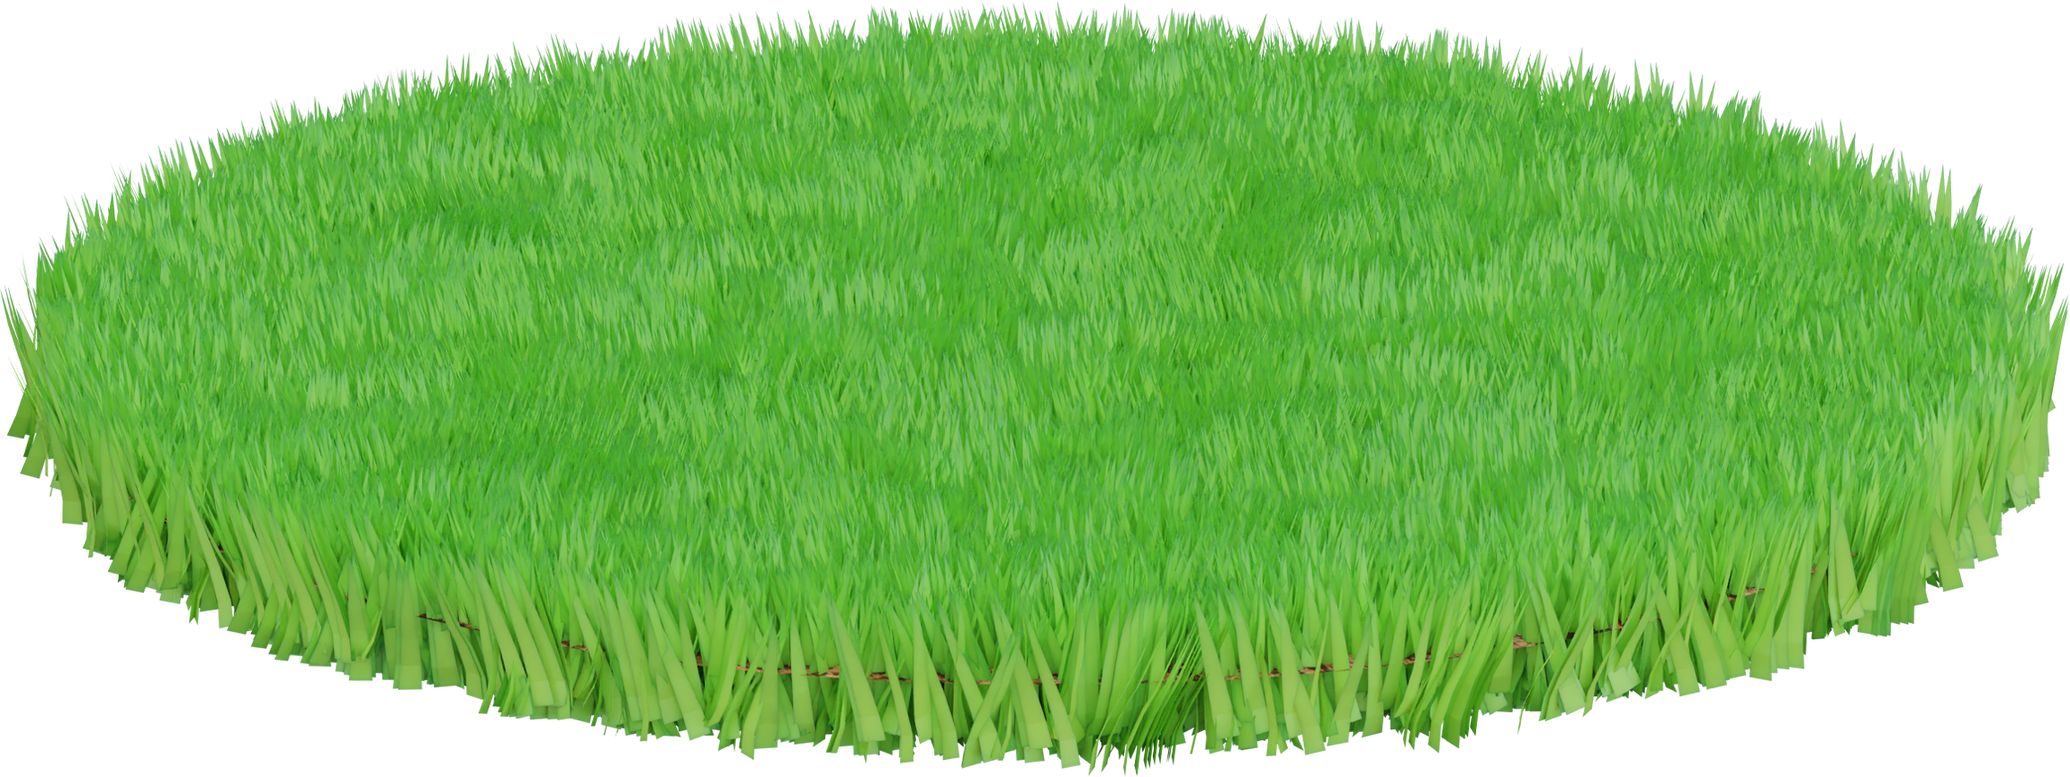 3D Green Grass Field Isolated.